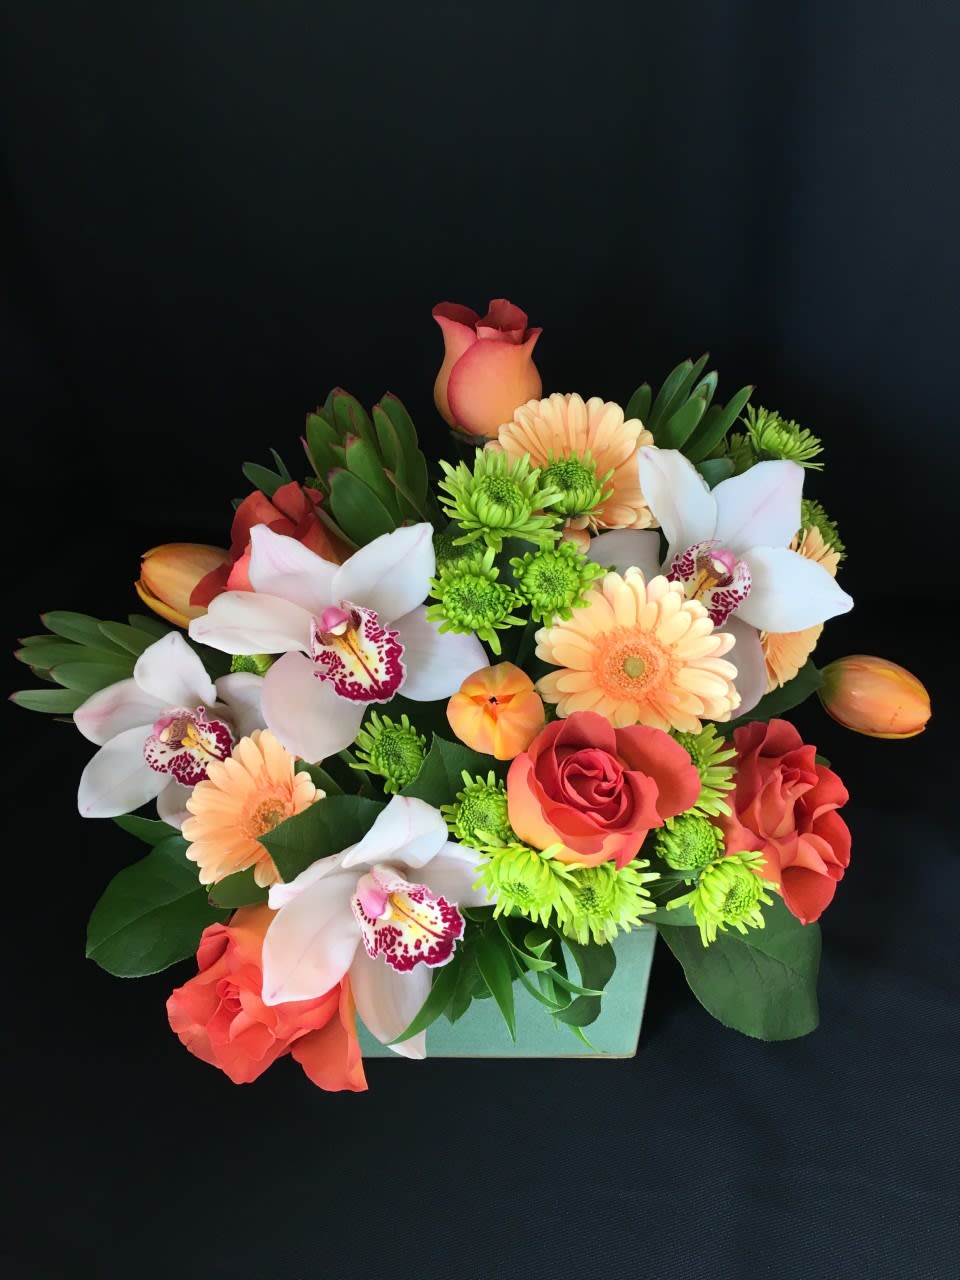 This pretty cube includes roses and Cymbidium orchids along with beautiful seasonal